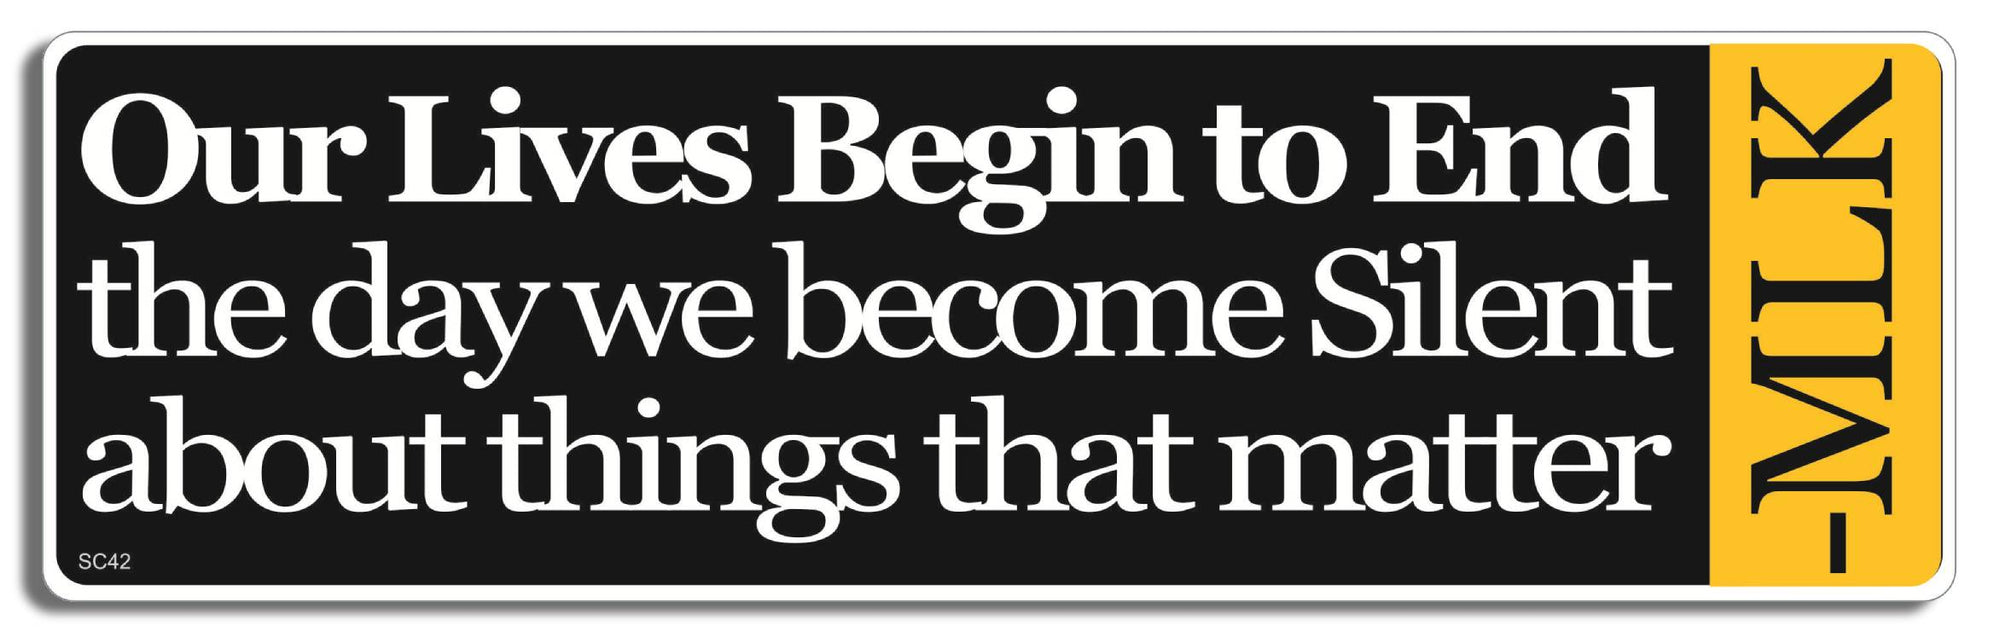 Our lives begin to end the day we become silent... - Dr. Martin Luther King. -  3" x 10" Bumper Sticker--Car Magnet- -  Decal Bumper Sticker-political Bumper Sticker Car Magnet Our lives begin to end the day we-  Decal for carsconservative, liberal, Political